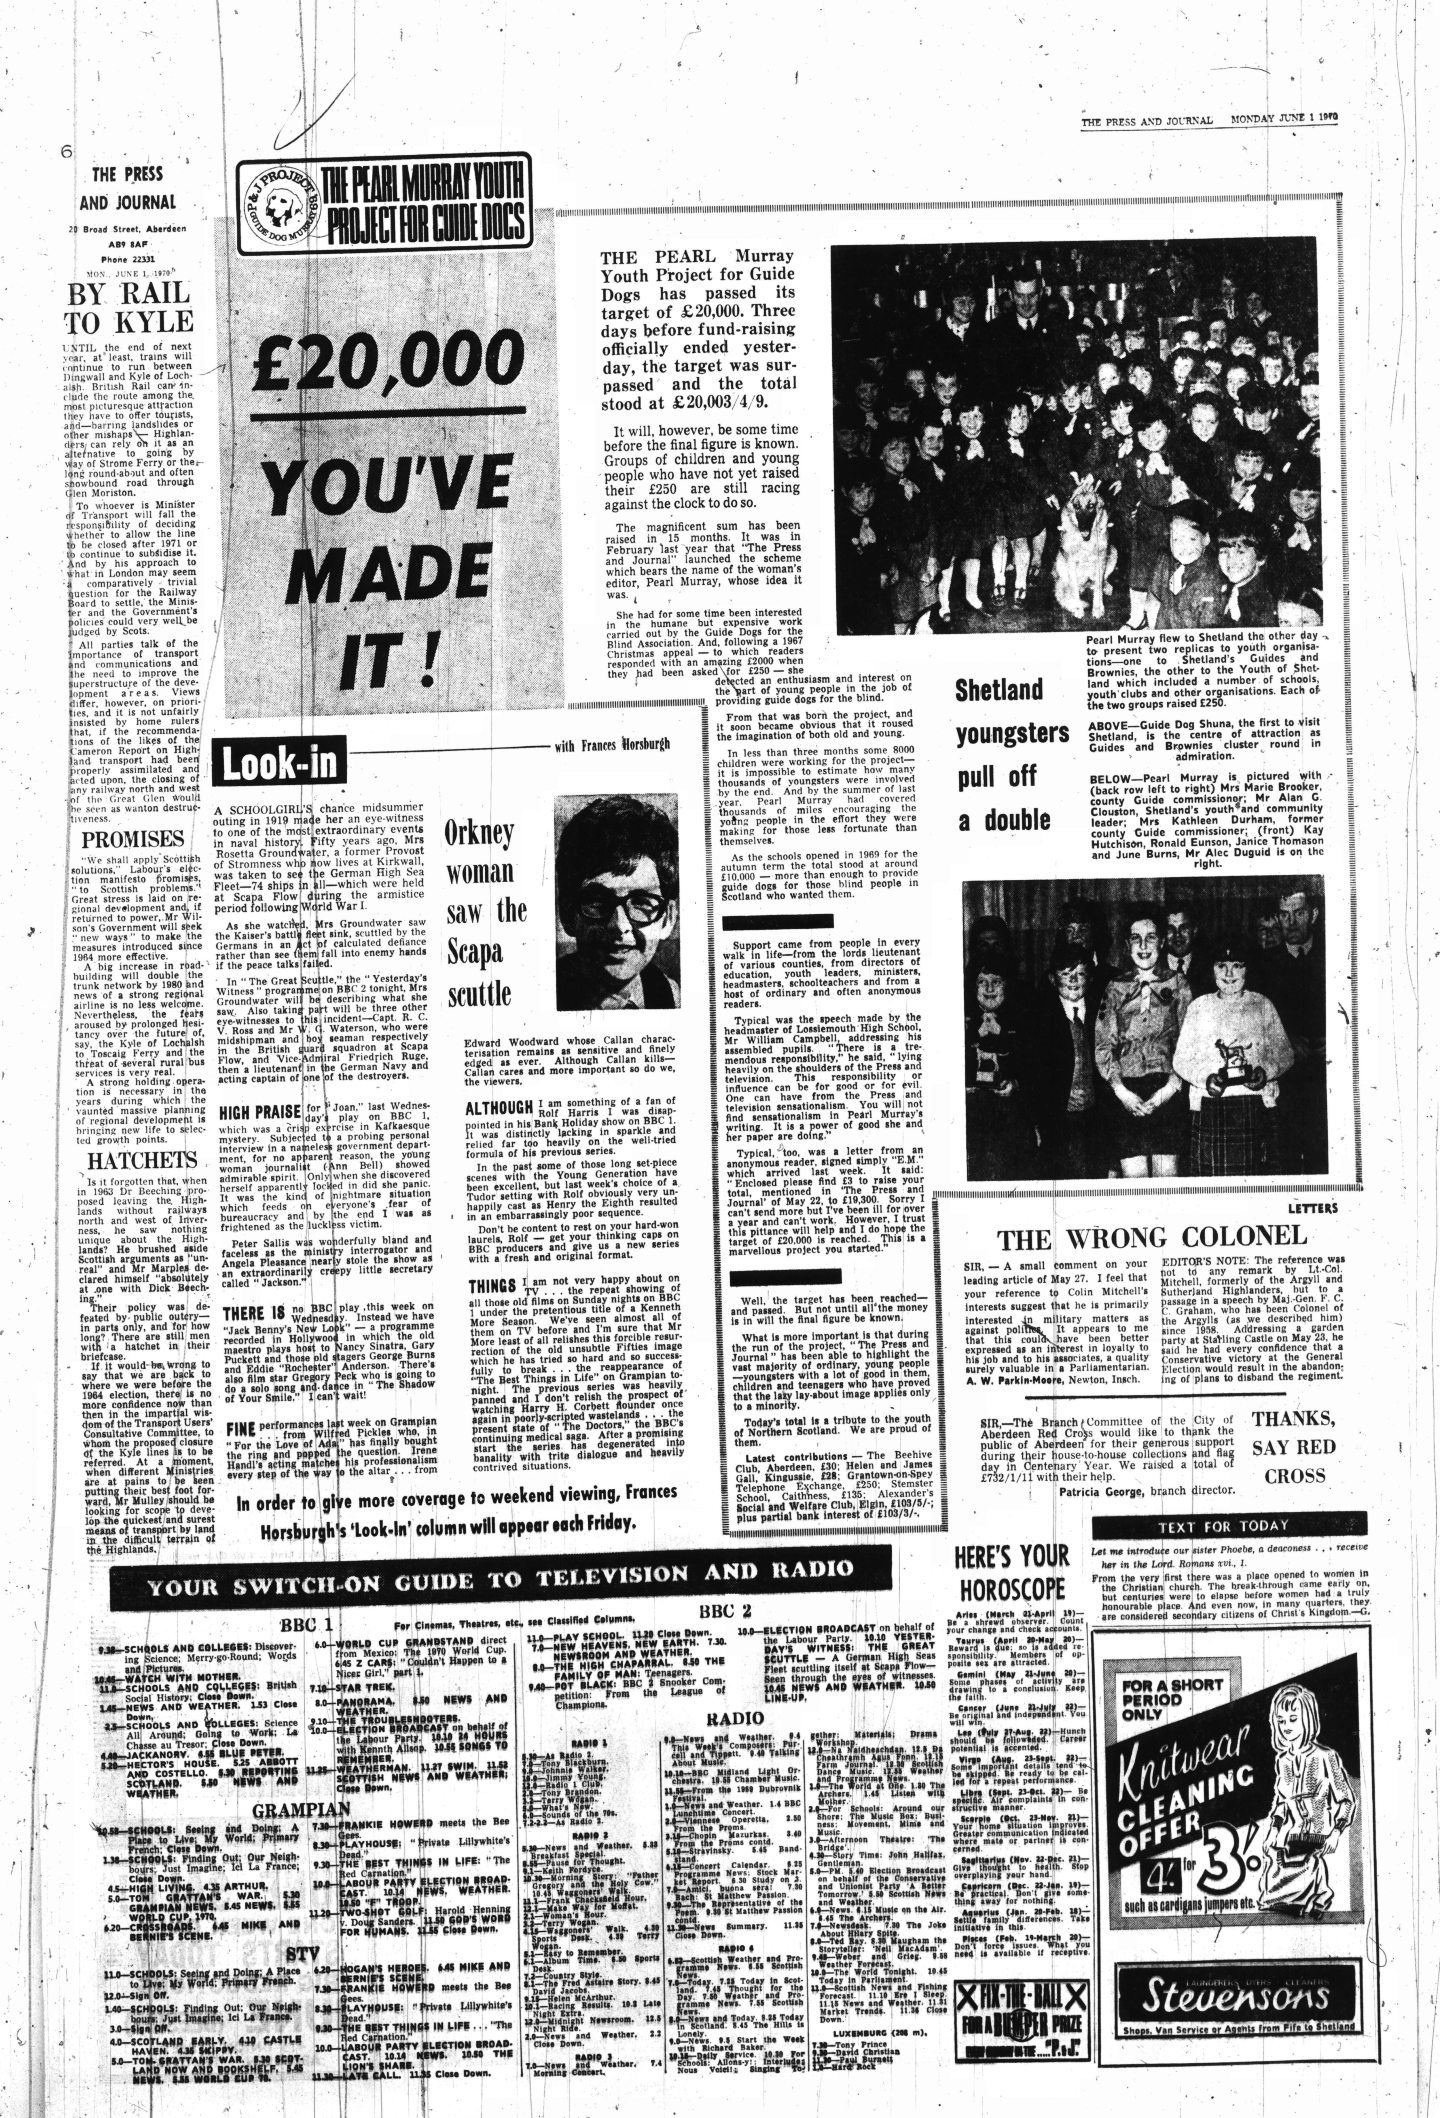 Newspaper article announcing that The Pearl Murray Youth Project had reached its goal